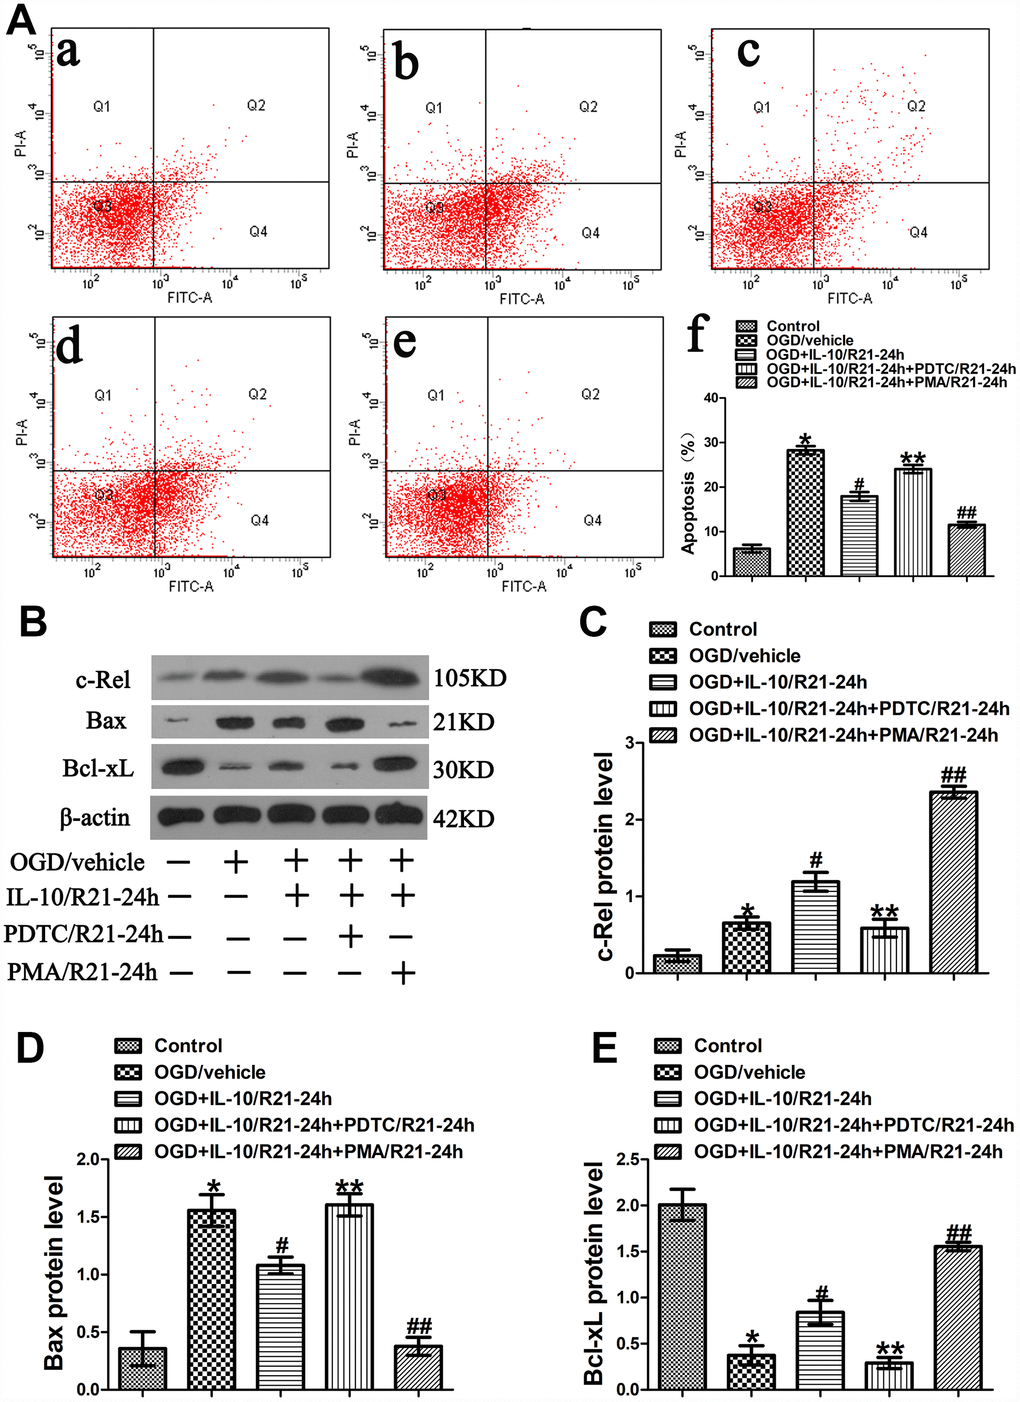 OGD-induced apoptosis decreased by IL-10 via c-Rel at a late stage after OGD injury. (A) Forty-eight hours after OGD, apoptosis of neurons was detected by flow cytometry. The signals from apoptotic neurons were localized in the Q2 and Q4 quadrants of the resulting dot-plot graph. (a) Control group; (b) OGD group; (c) OGD+IL-10/R21-24h group; (d) OGD+IL-10/R21-24h+PDTC/R21-24h; (e) OGD+IL-10/R21-24h+PMA/R21-24h group; (f) Statistical graph of apoptosis in different groups (n=3). *p#pp##ppB) The representative image of western blot analysis for c-Rel, Bax and Bcl-xL expression. (C) Western blot analysis of c-Rel (n=3). *p#pp##ppD) Western blot analysis of Bax (n=3). *p#pp##ppE) Western blot analysis of Bcl-xL (n=3). *p#pp##pp